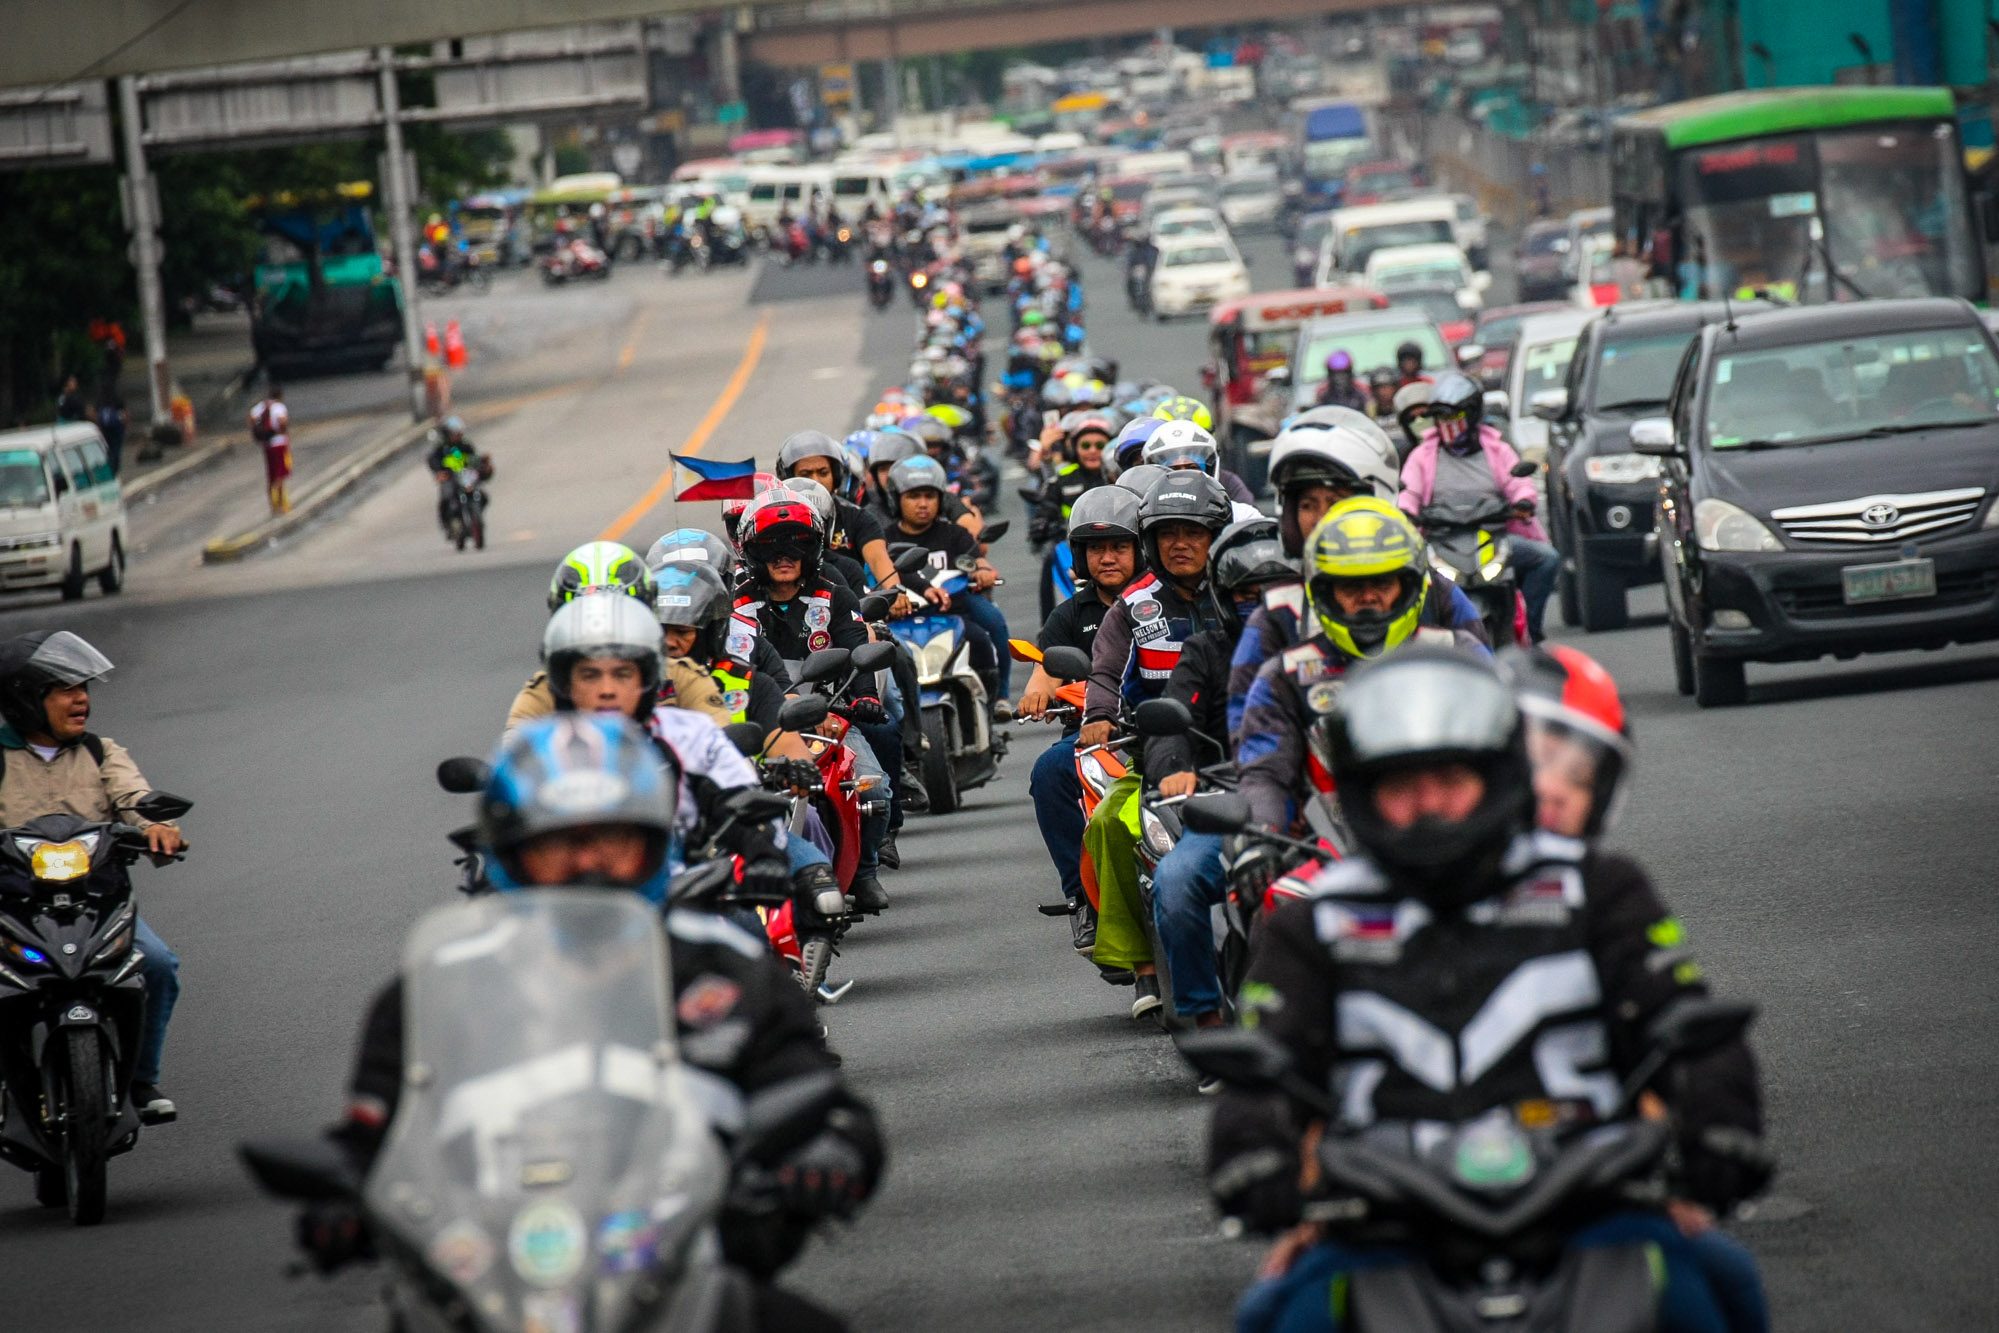 Right to ride: Over 2,000 riders join ‘Unity Ride’ to call for motorcycle taxi regulation